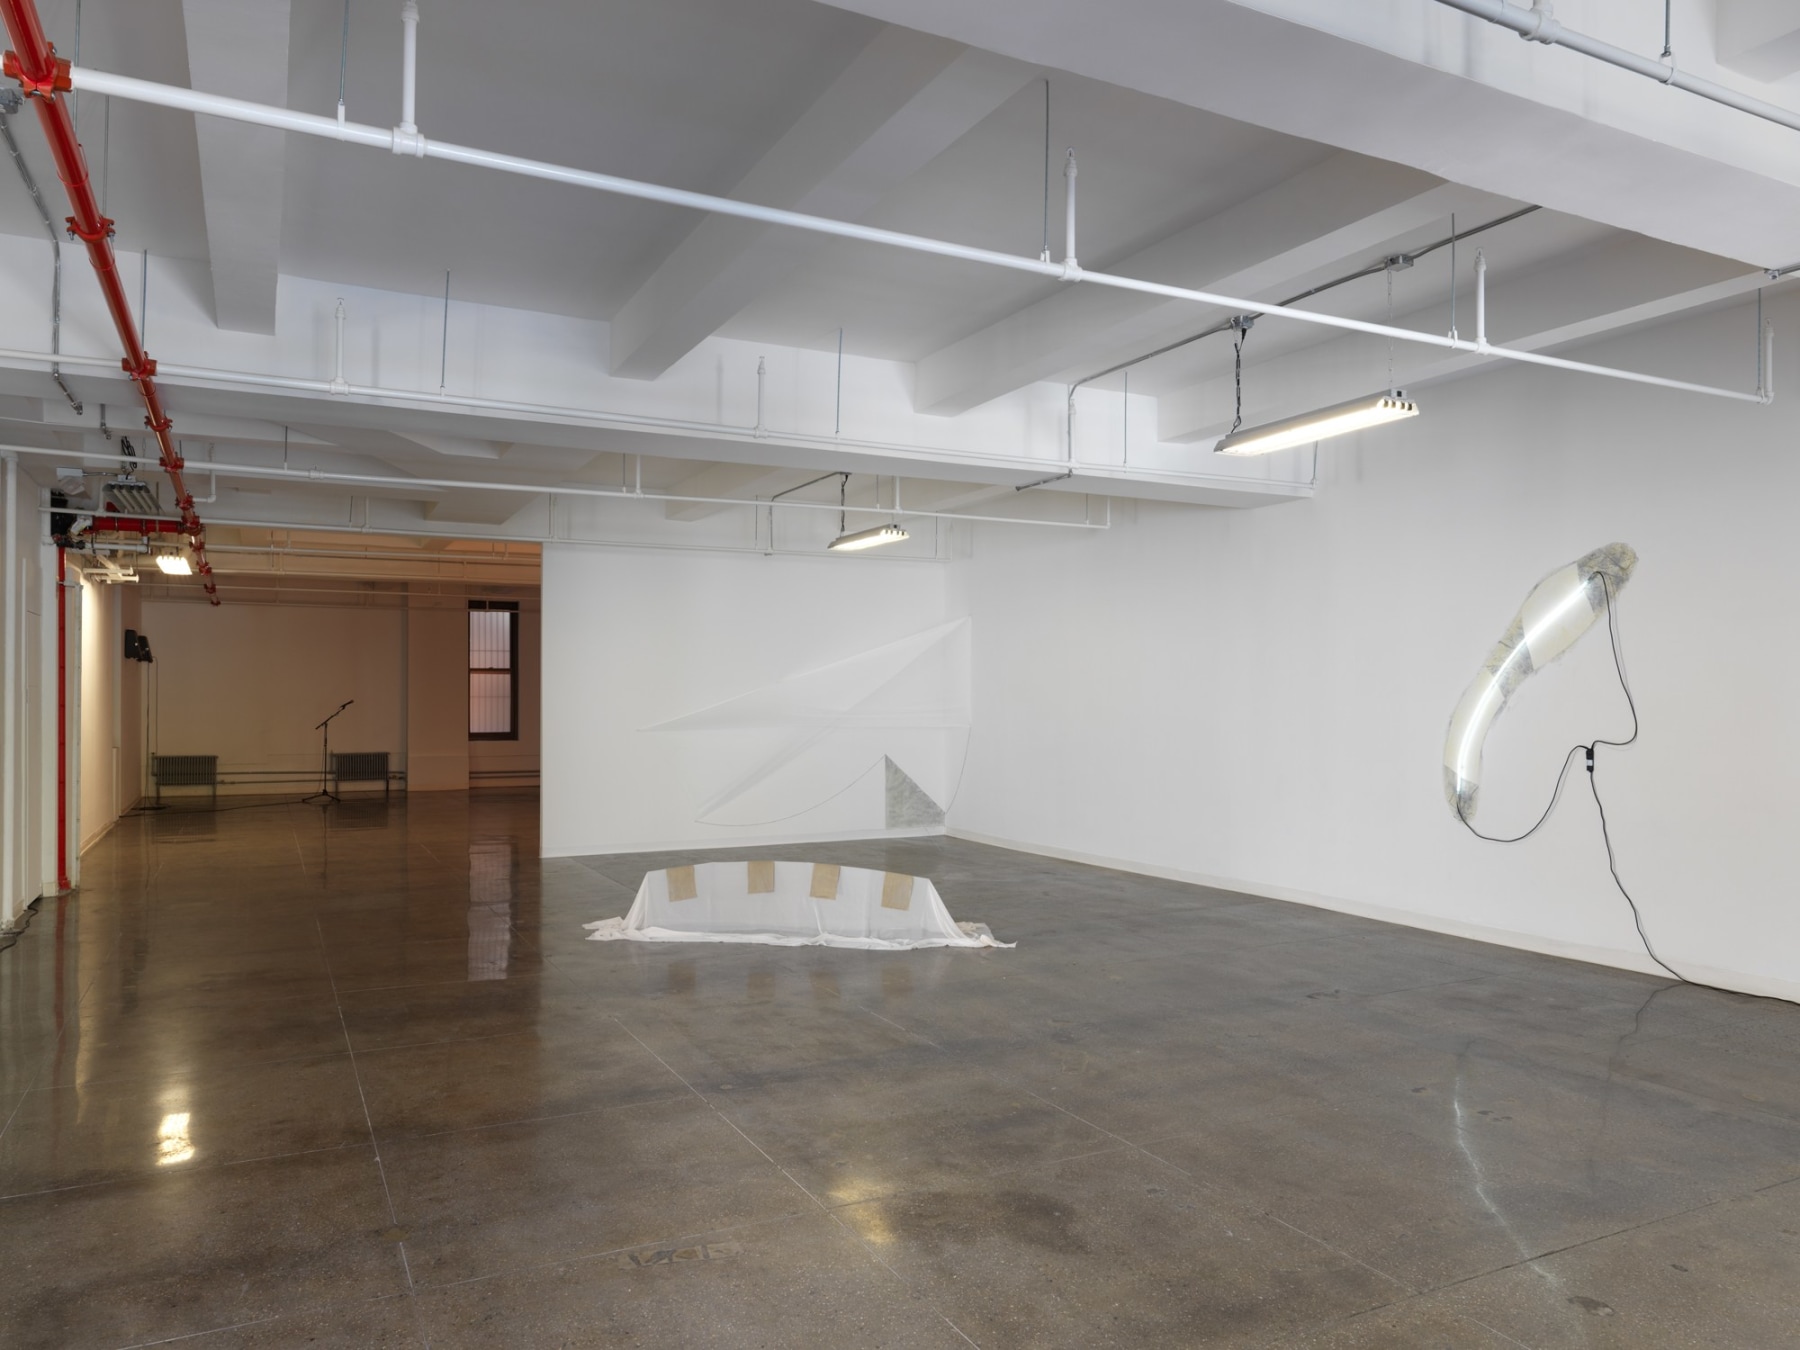 Installation view, Ethereal / Ephemeral: Keith Sonnier in the Sixties, 24 WEST 40